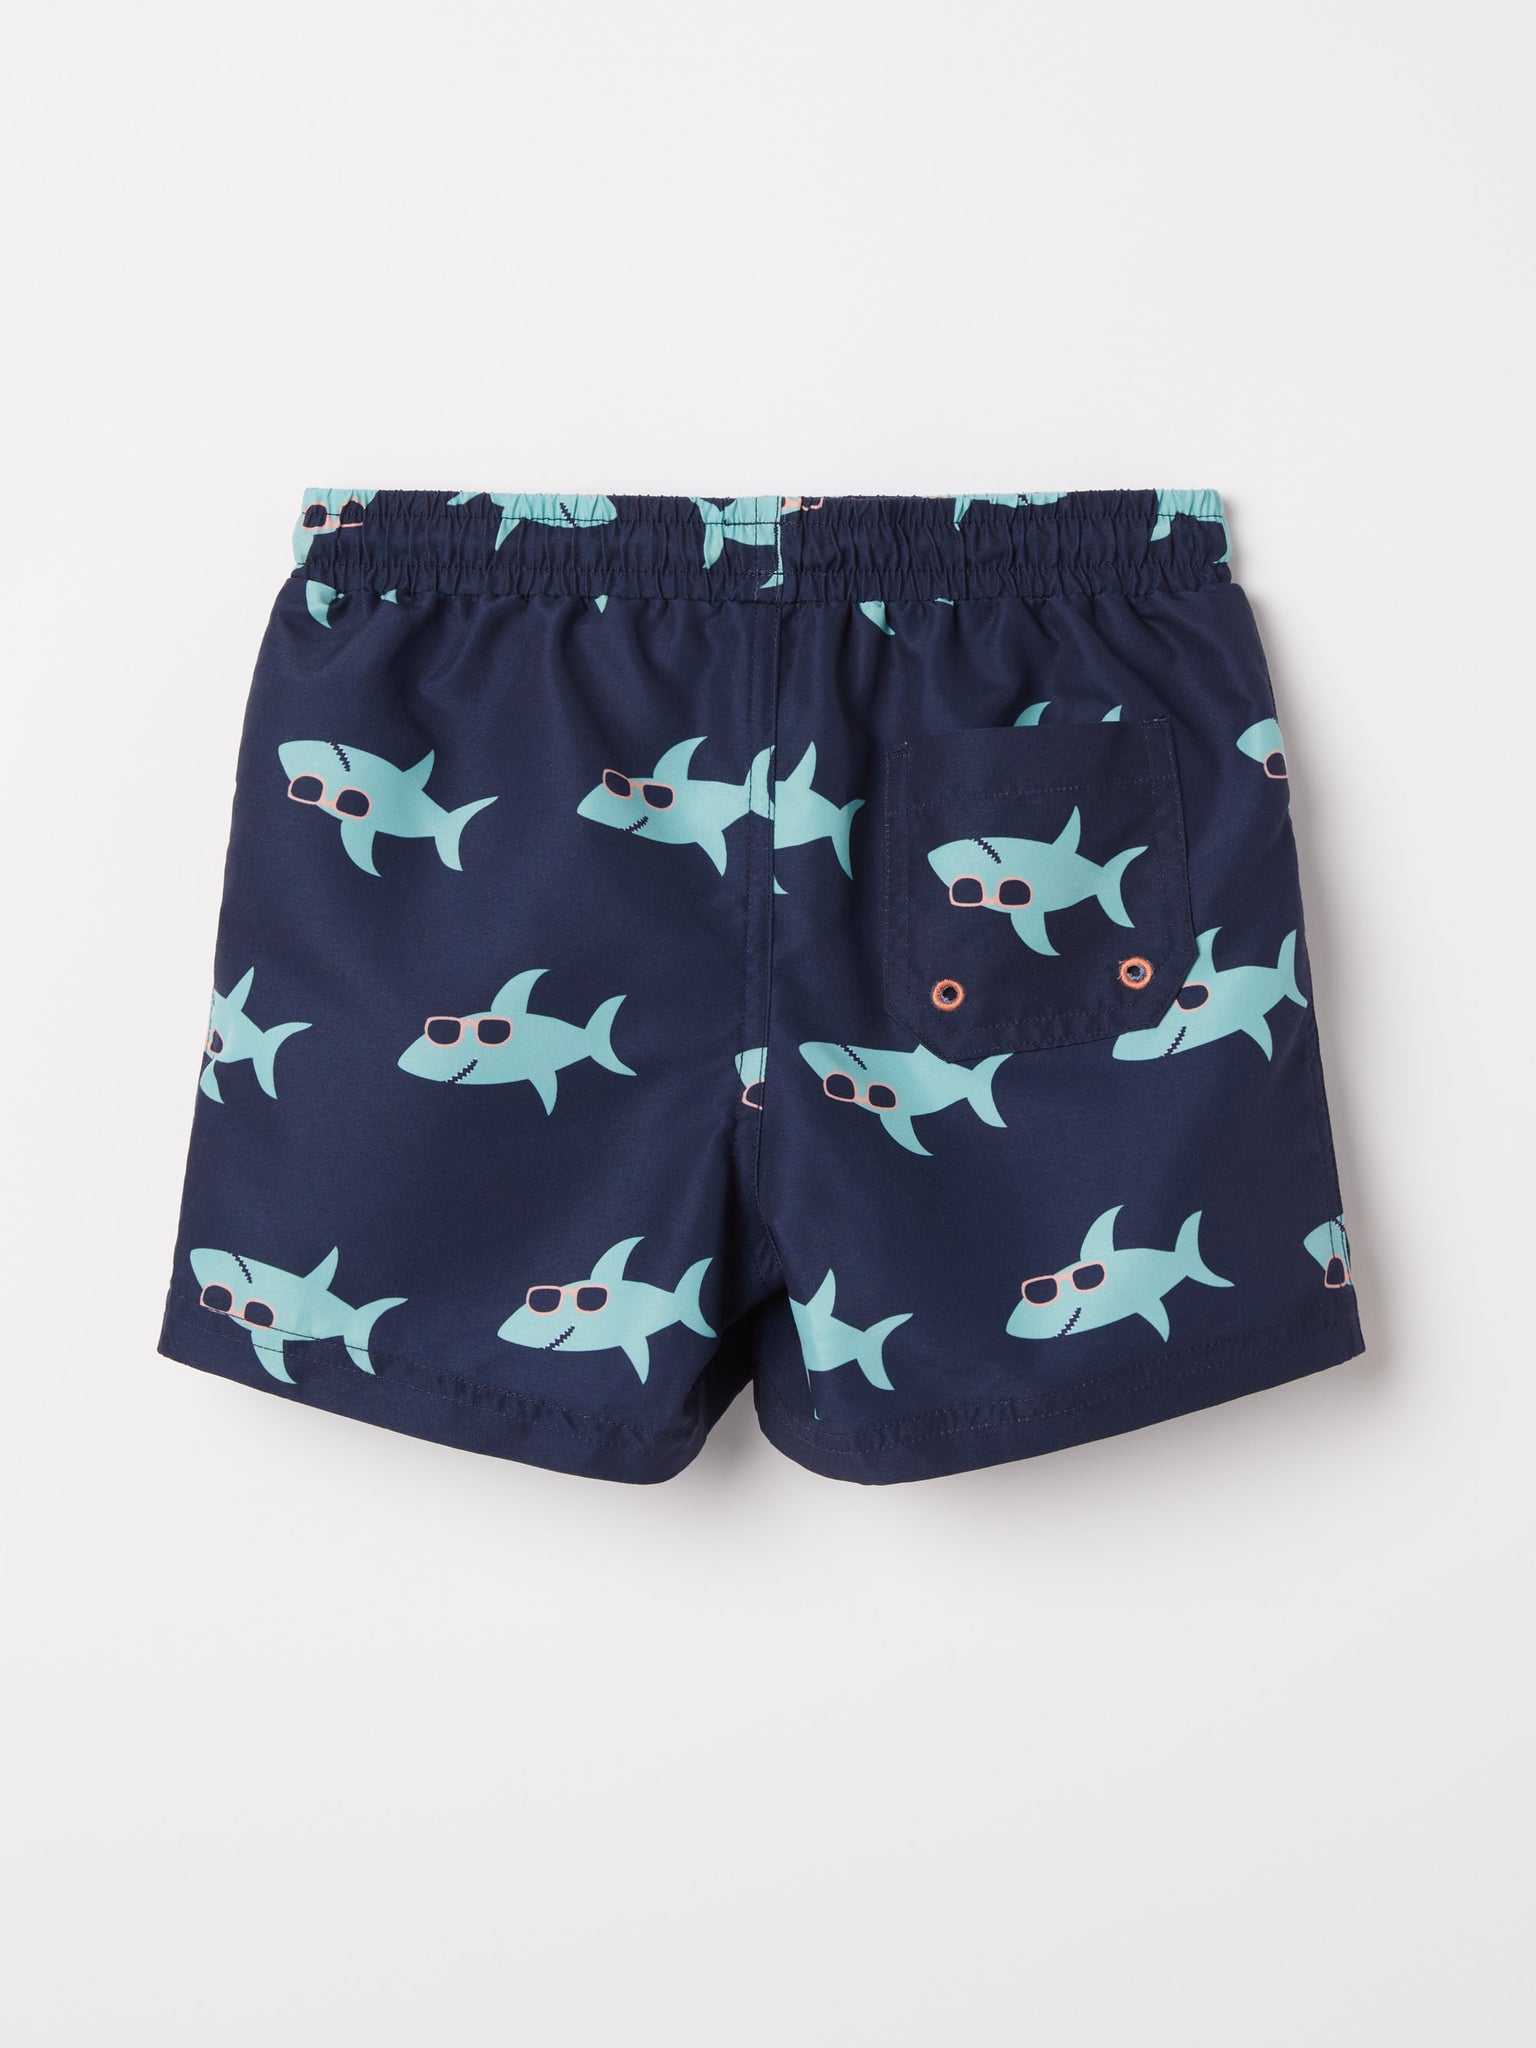 Shark Print Kids Swim Shorts from the Polarn O. Pyret baby collection. Nordic kids clothes made from sustainable sources.